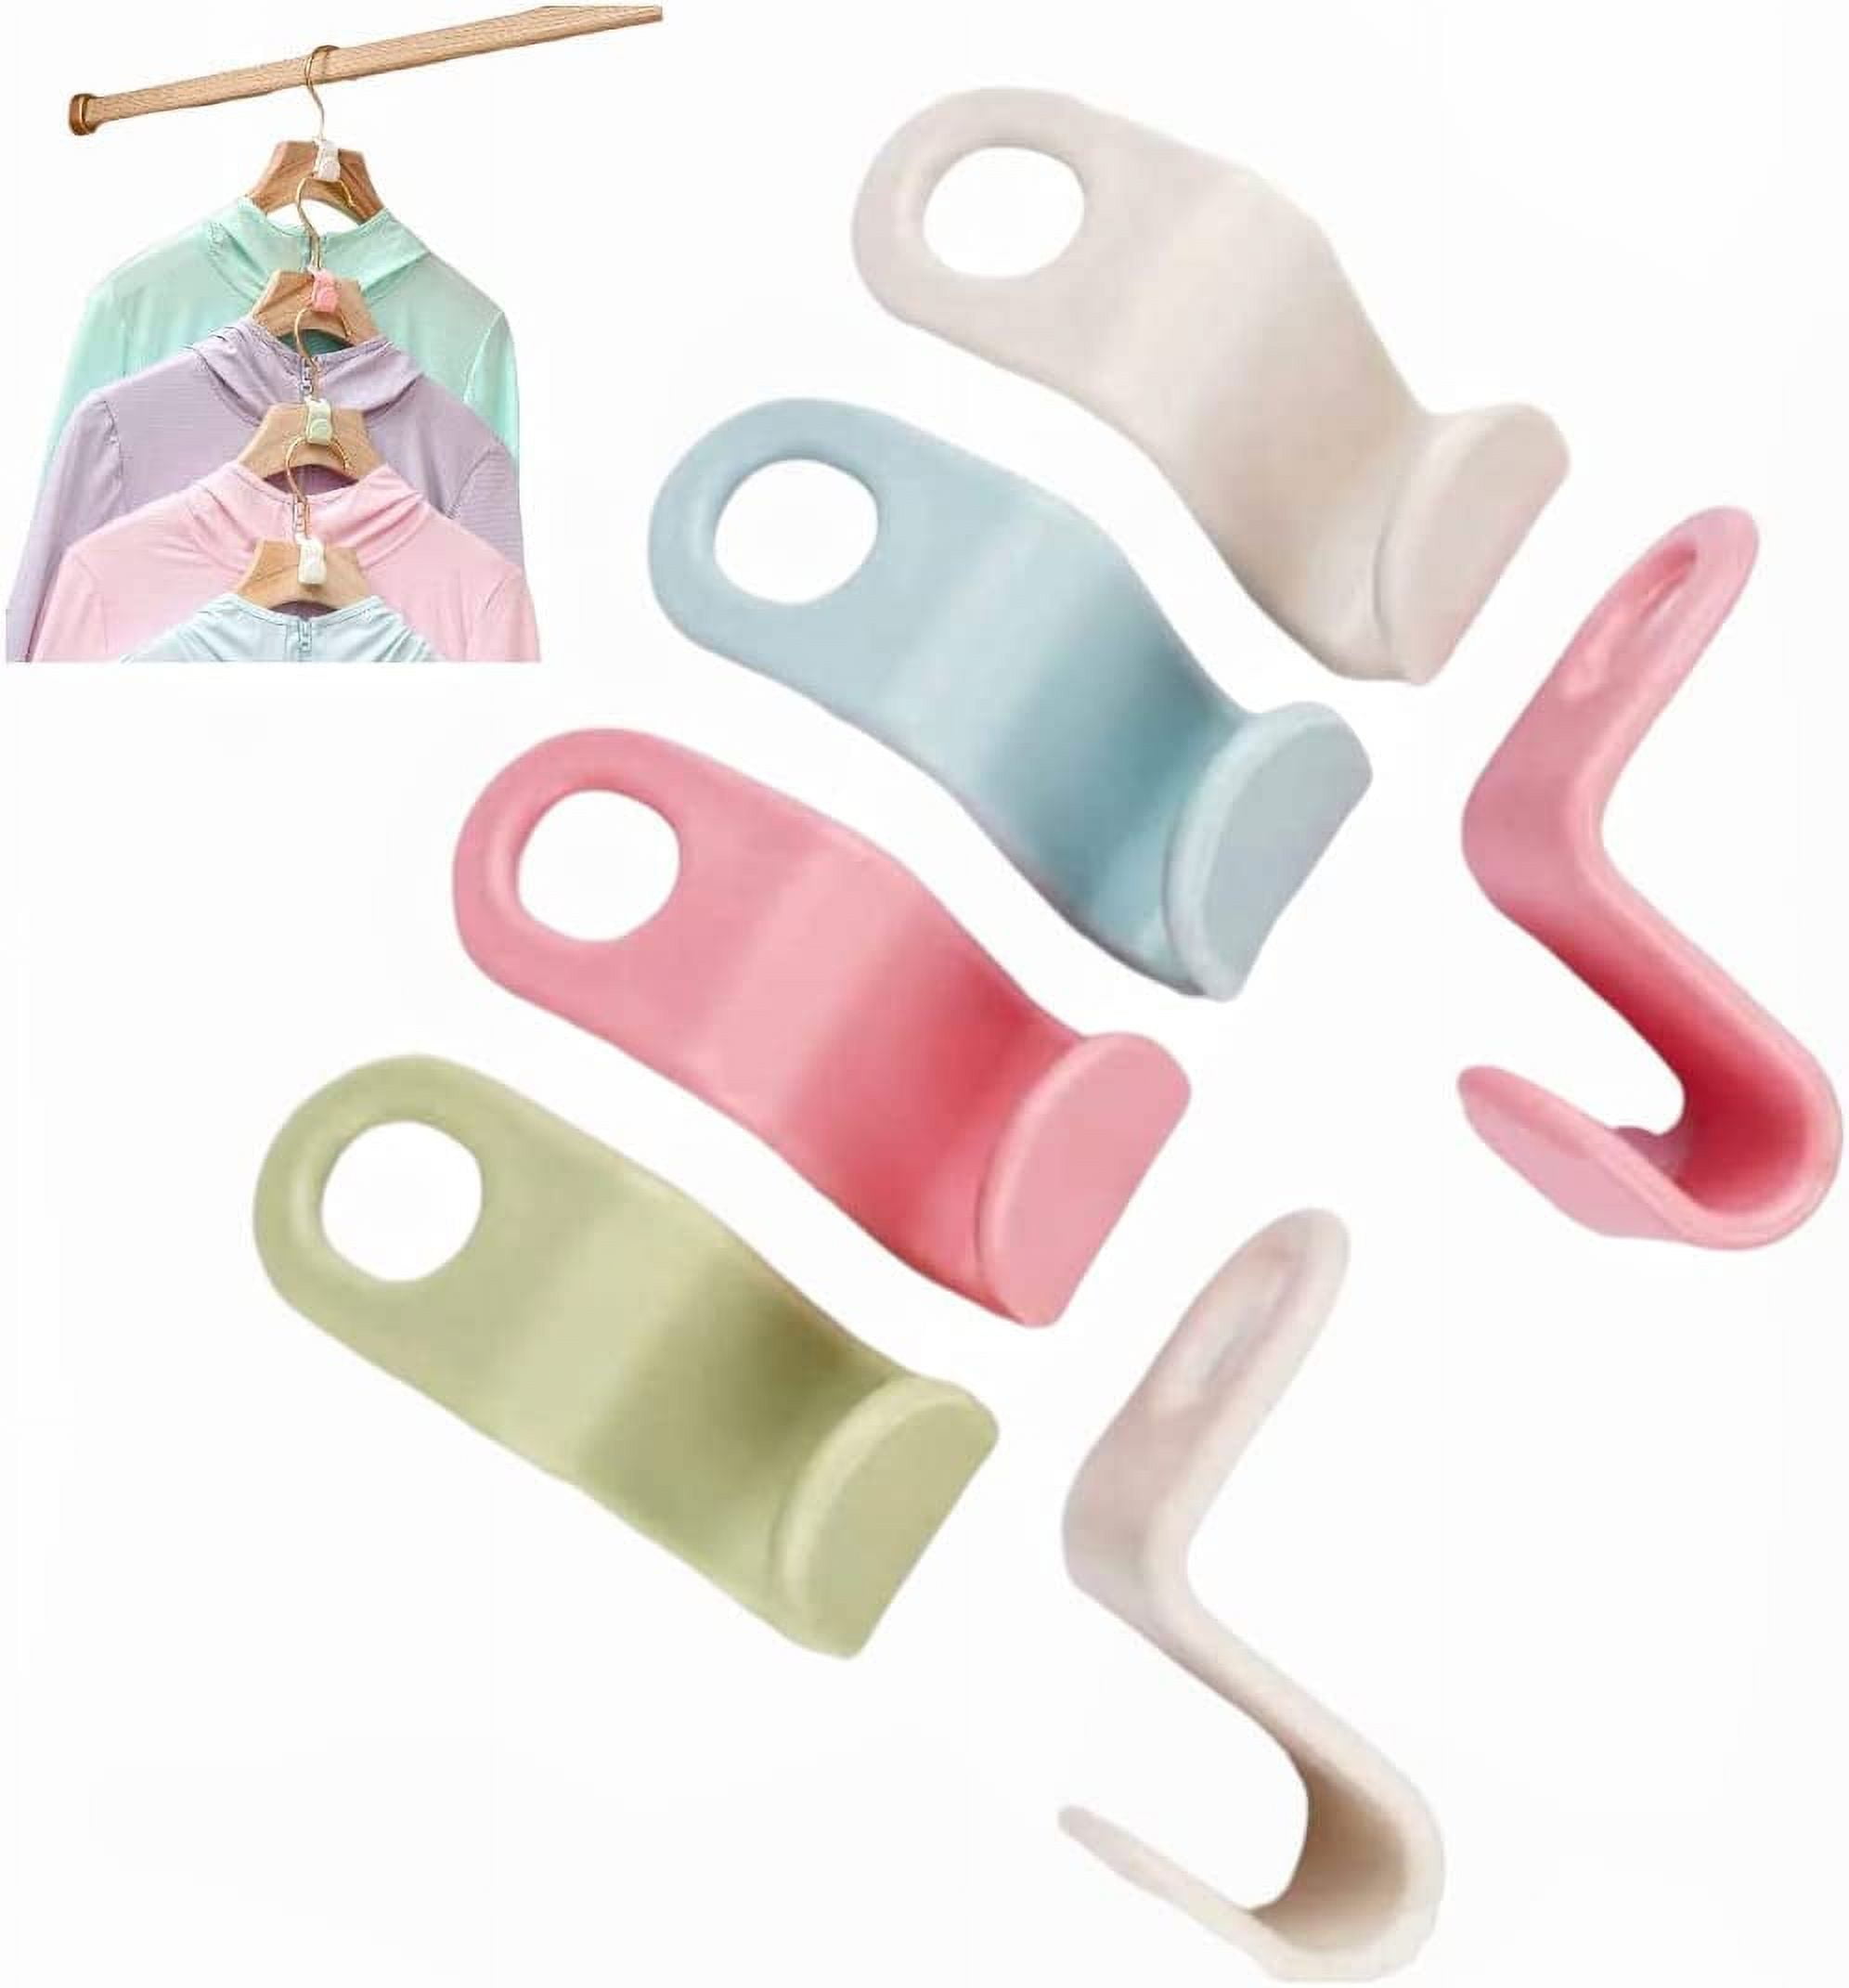 Rv Clothes Hangers